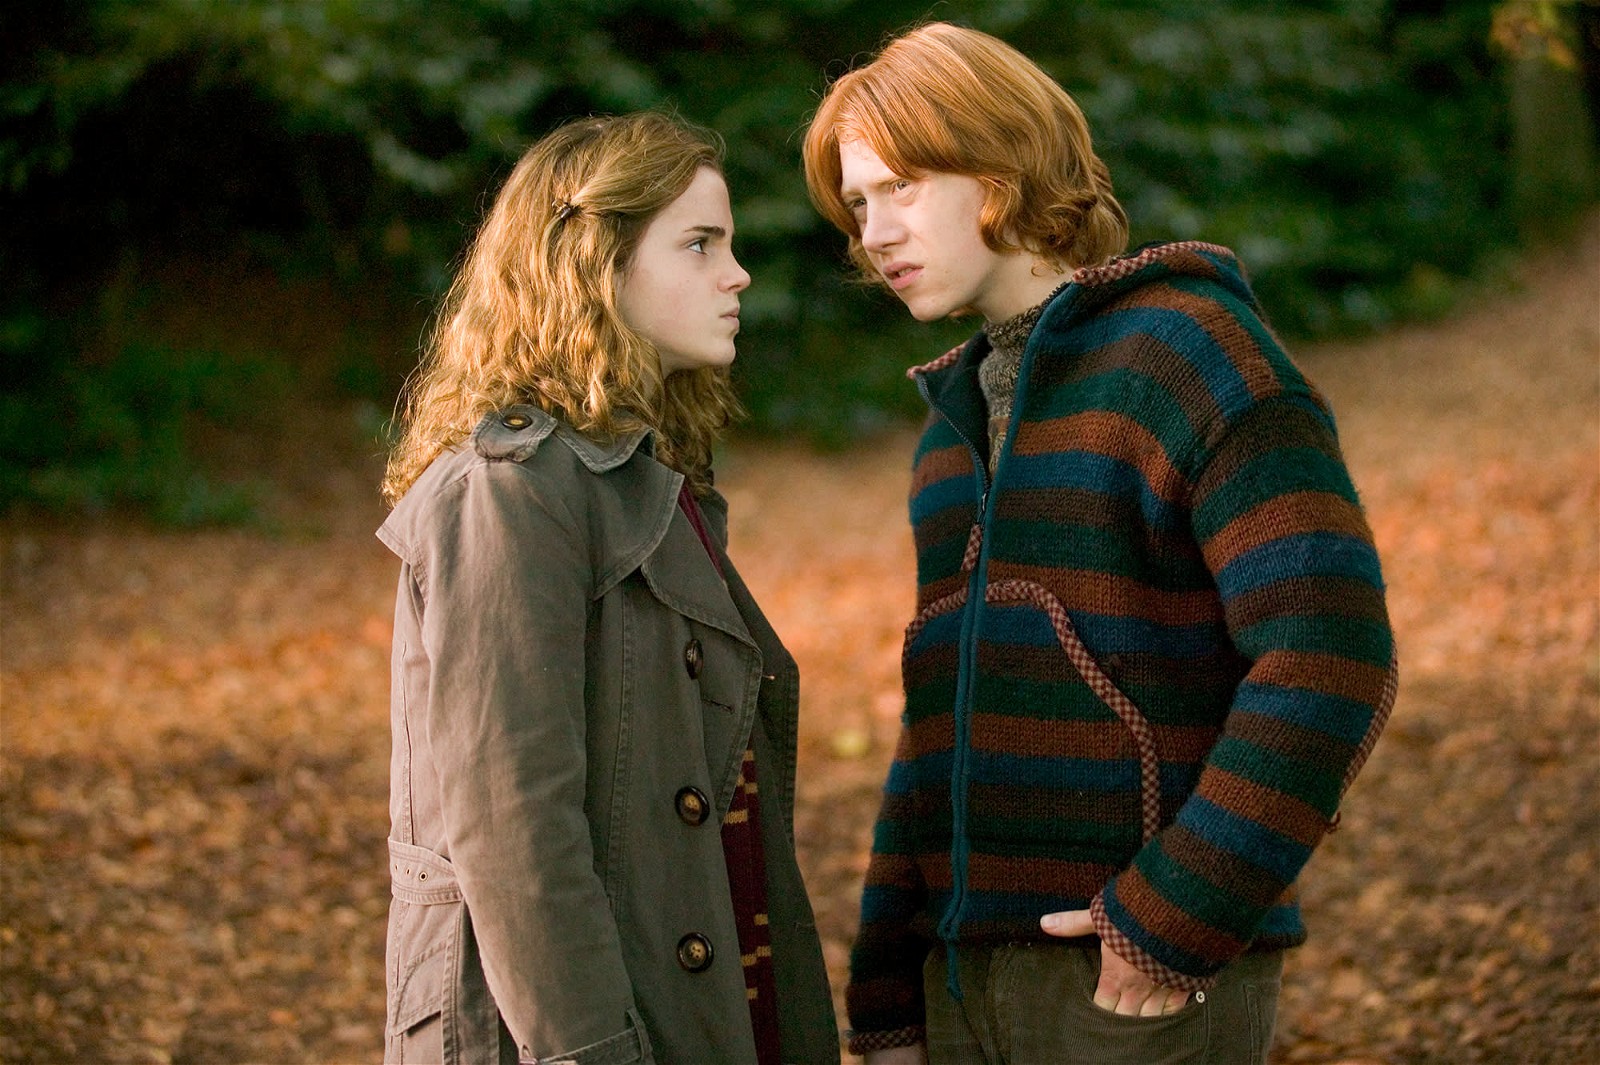 Most fans wrent happy with the the fact that Hermione ended up with Ron instead of Harry